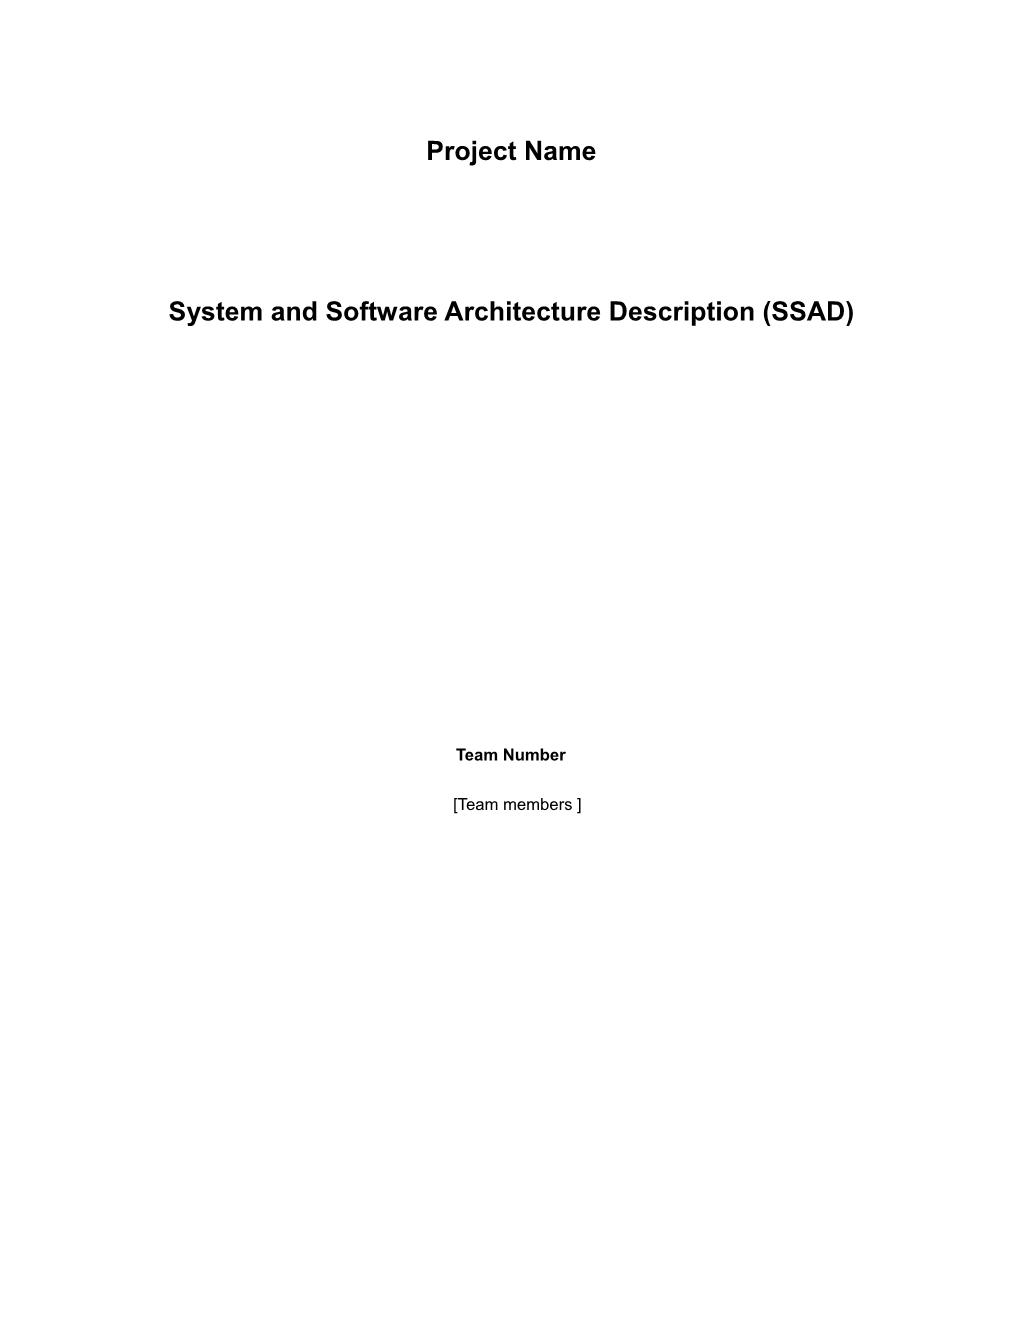 System and Software Architecture Description